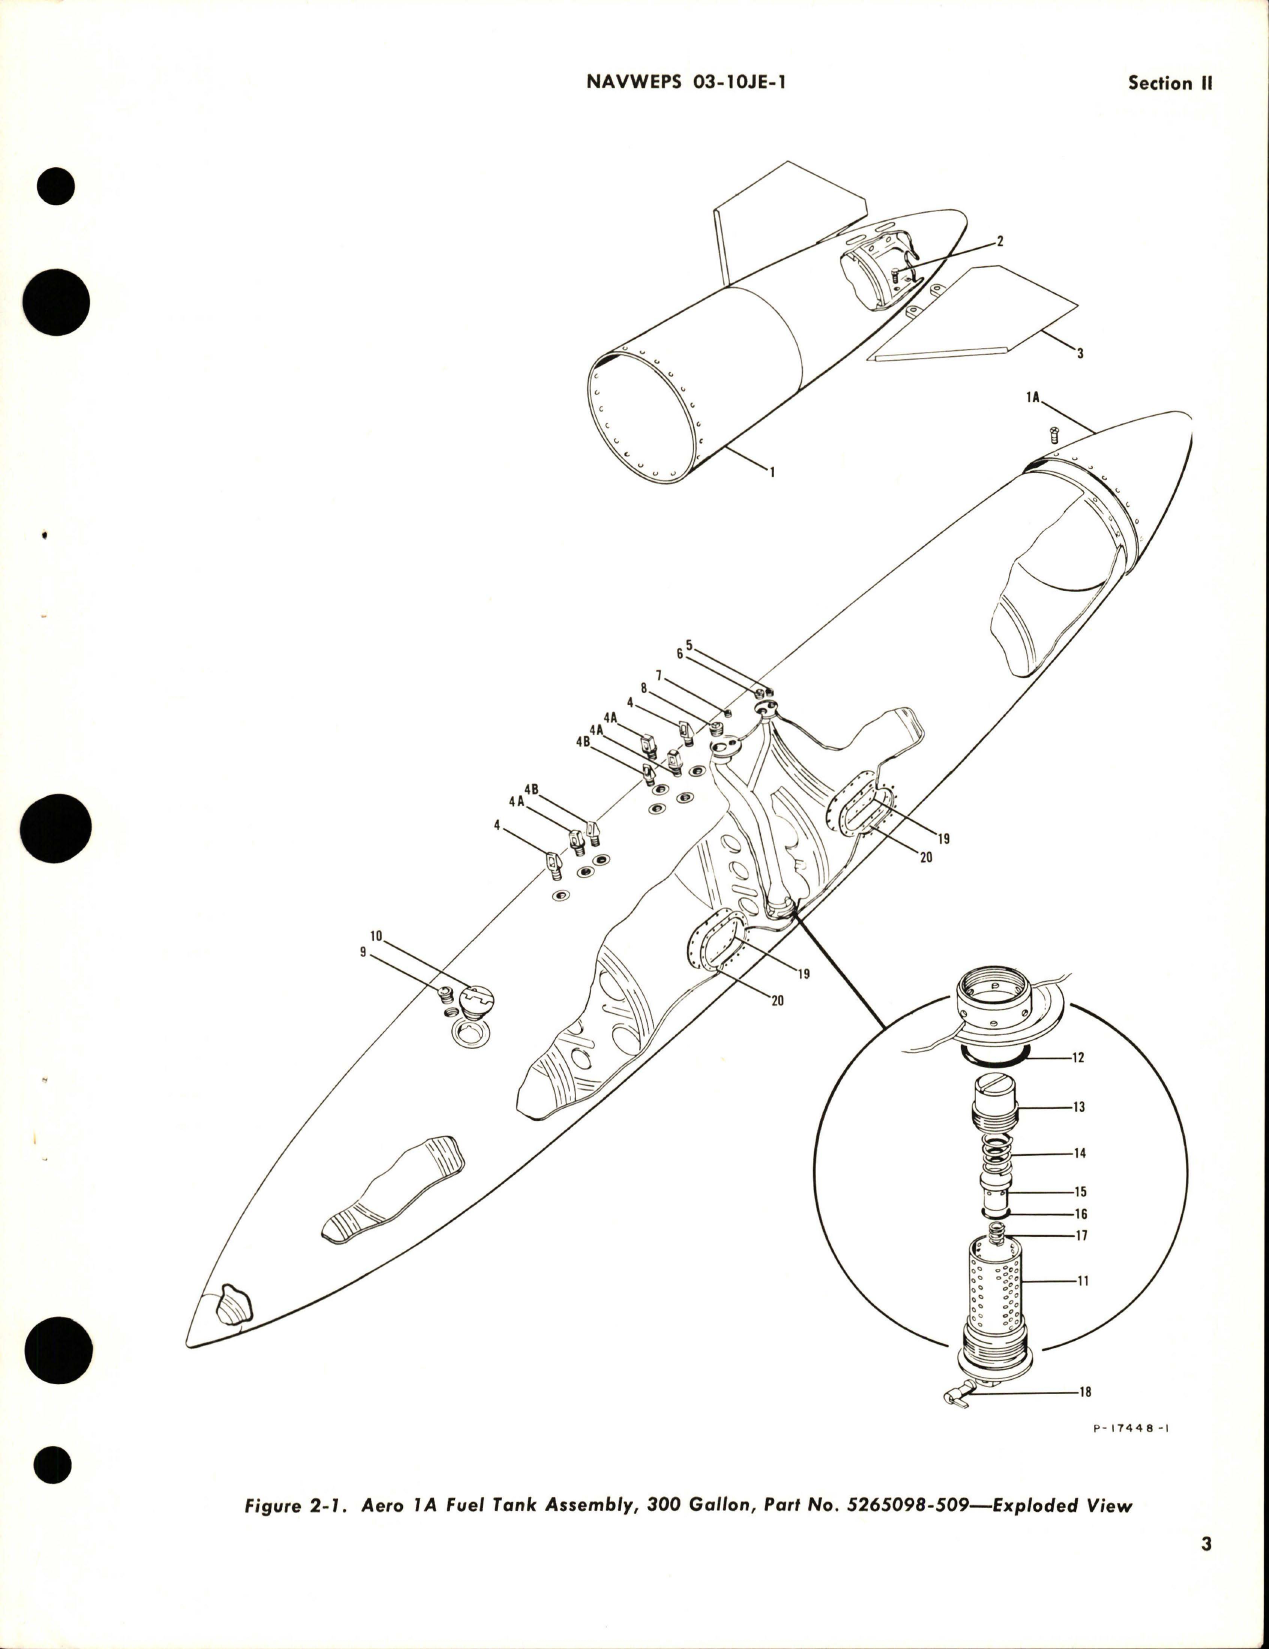 Sample page 7 from AirCorps Library document: Overhaul Instructions for 300 Gallon Fuel Tank Assembly